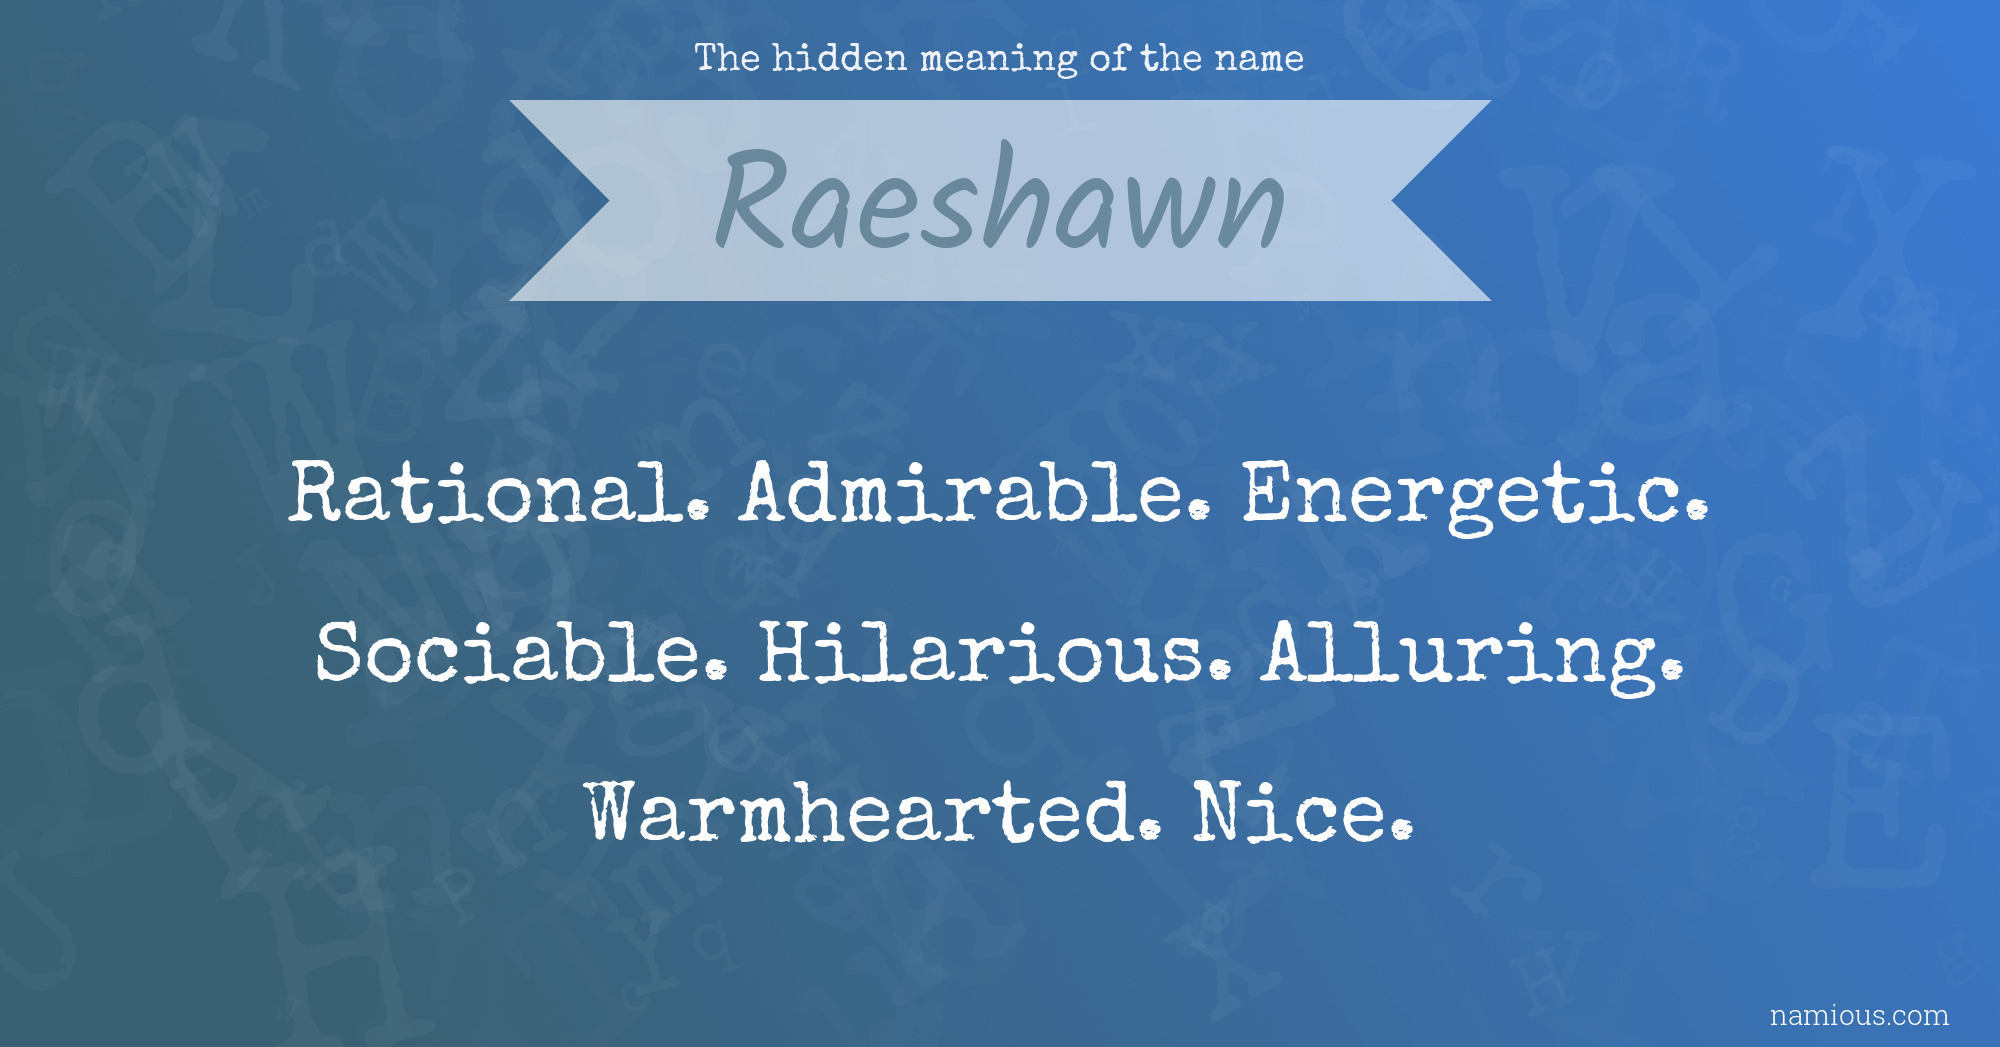 The hidden meaning of the name Raeshawn